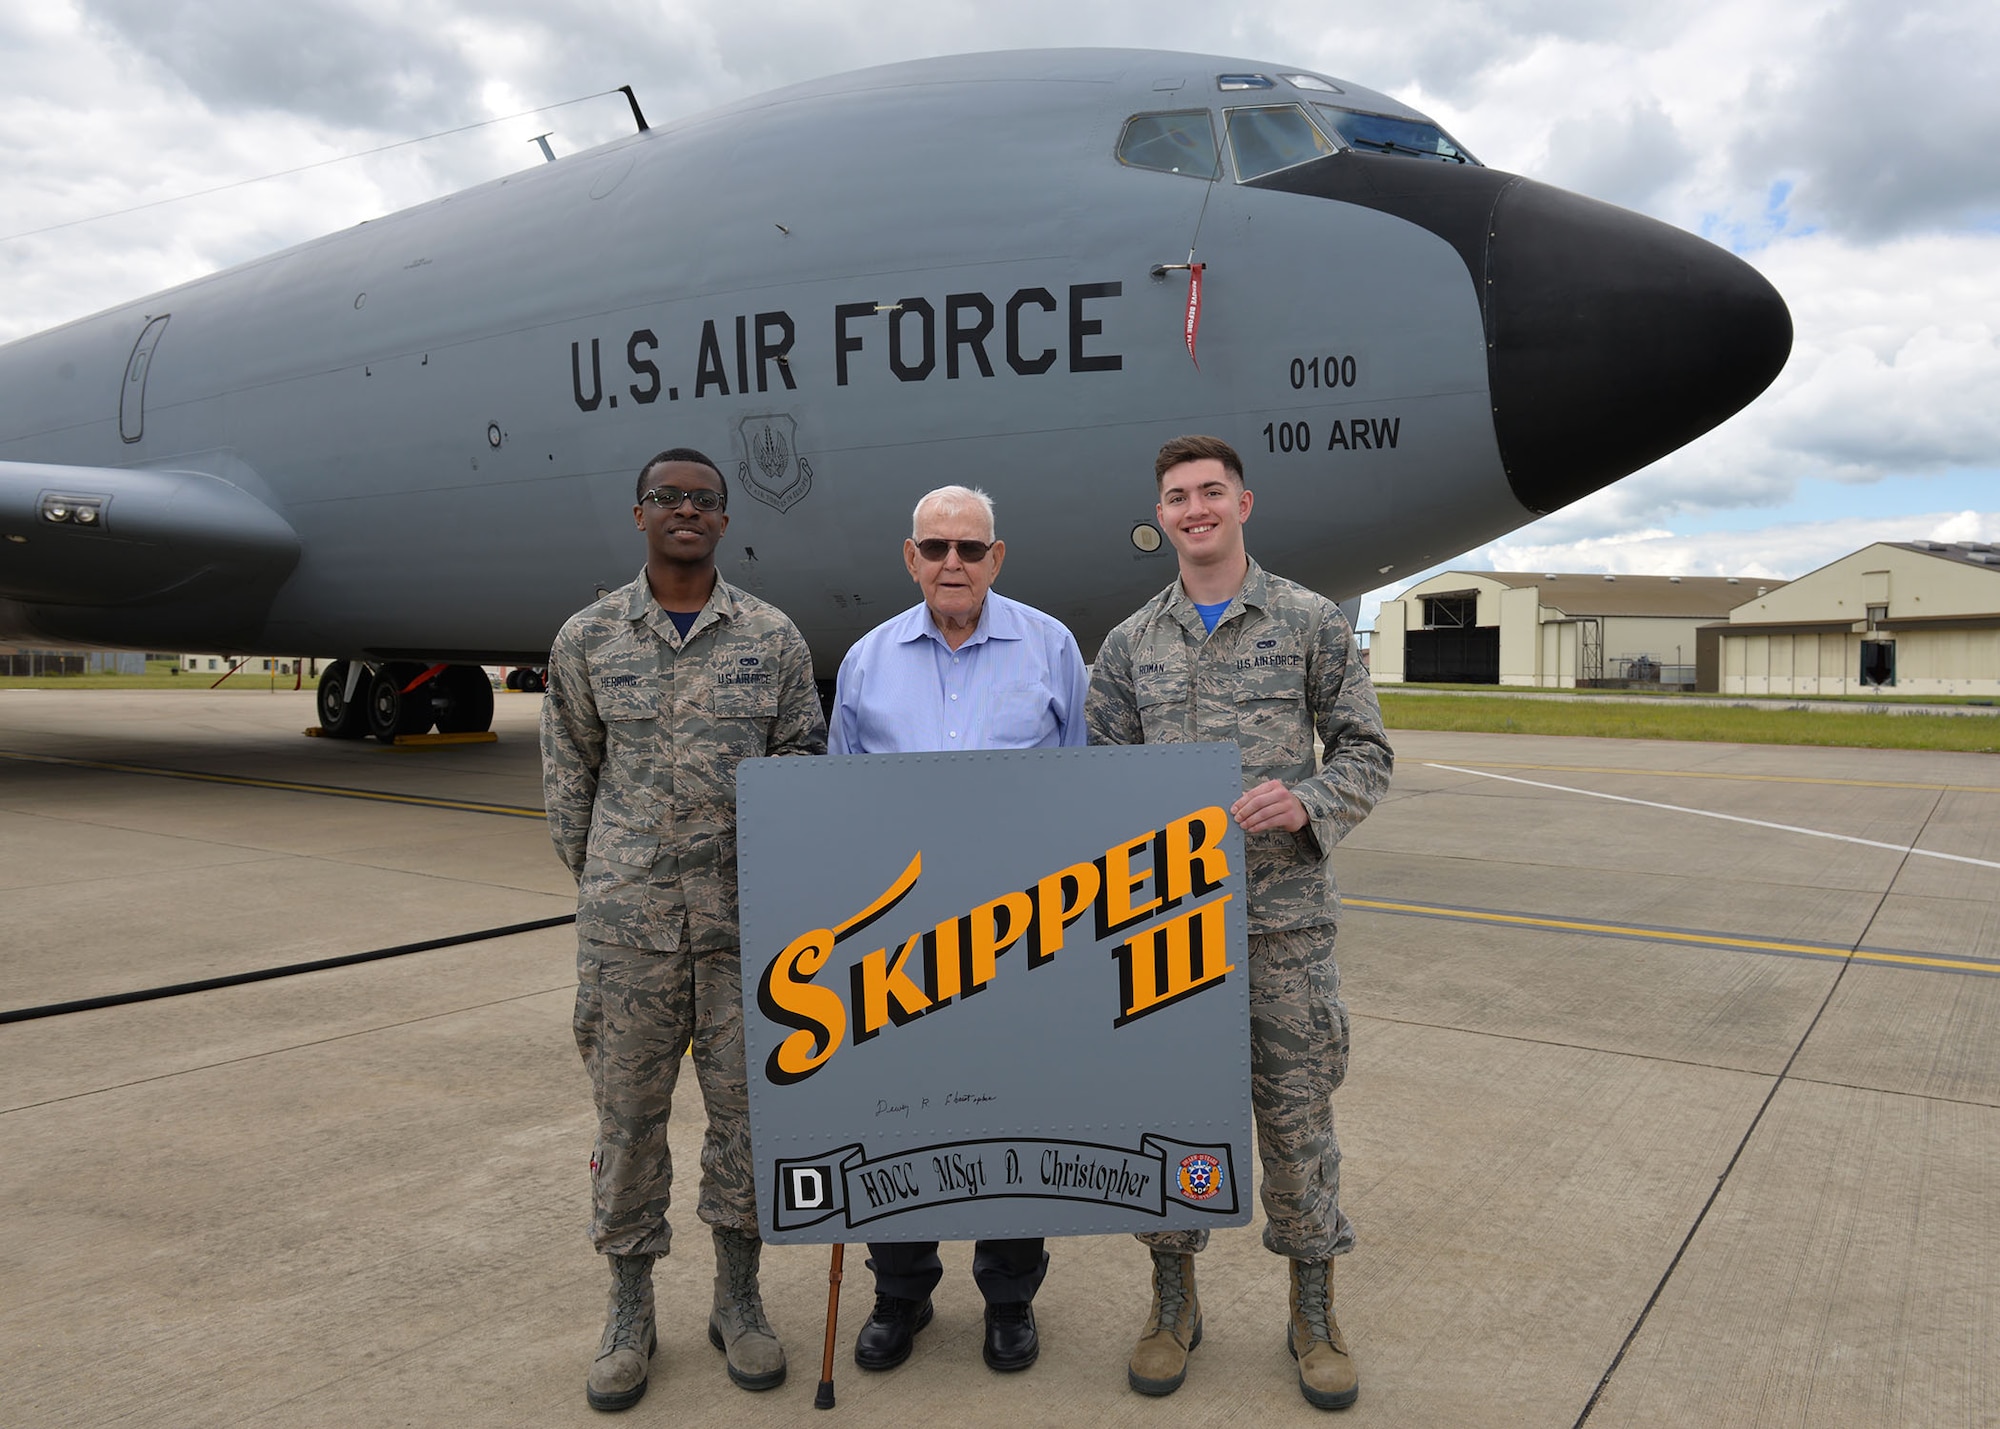 U.S. Air Force Airman 1st Class Isaiah Herring, left, 100th Aircraft Maintenance Squadron maintainer, and U.S. Air Force Airman Camden Roman, 100th Maintenance Squadron maintainer, pose for a photo with retired Master Sgt. Dewey Christopher, a former 351st Bomb Squadron crew chief, 100th Bomb Group and World War II veteran, during the veteran’s visit to RAF Mildenhall, England, June 21, 2019. Christopher visited the base to attend a renaming ceremony of the Professional Development Center in his honor. (U.S. Air Force photo by Karen Abeyasekere)